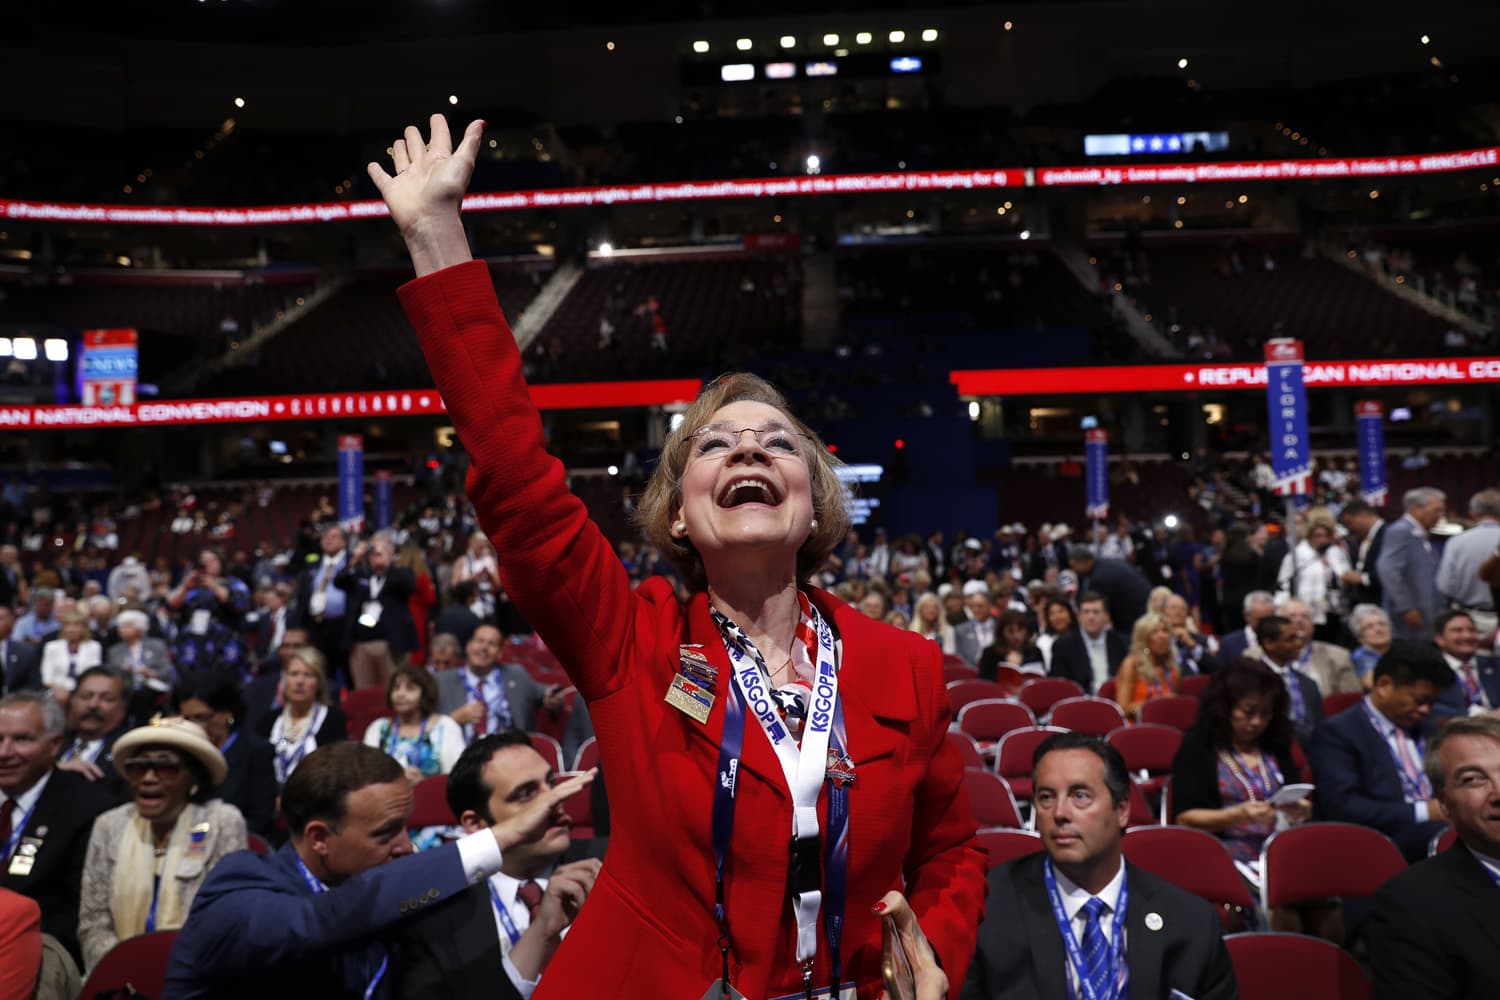 Kansas delegate Beverly Gossage cheers as Sen. Pat Roberts, R-Kan., speaks during first day of the Republican National Convention in Cleveland. (Carolyn Kaster/AP)